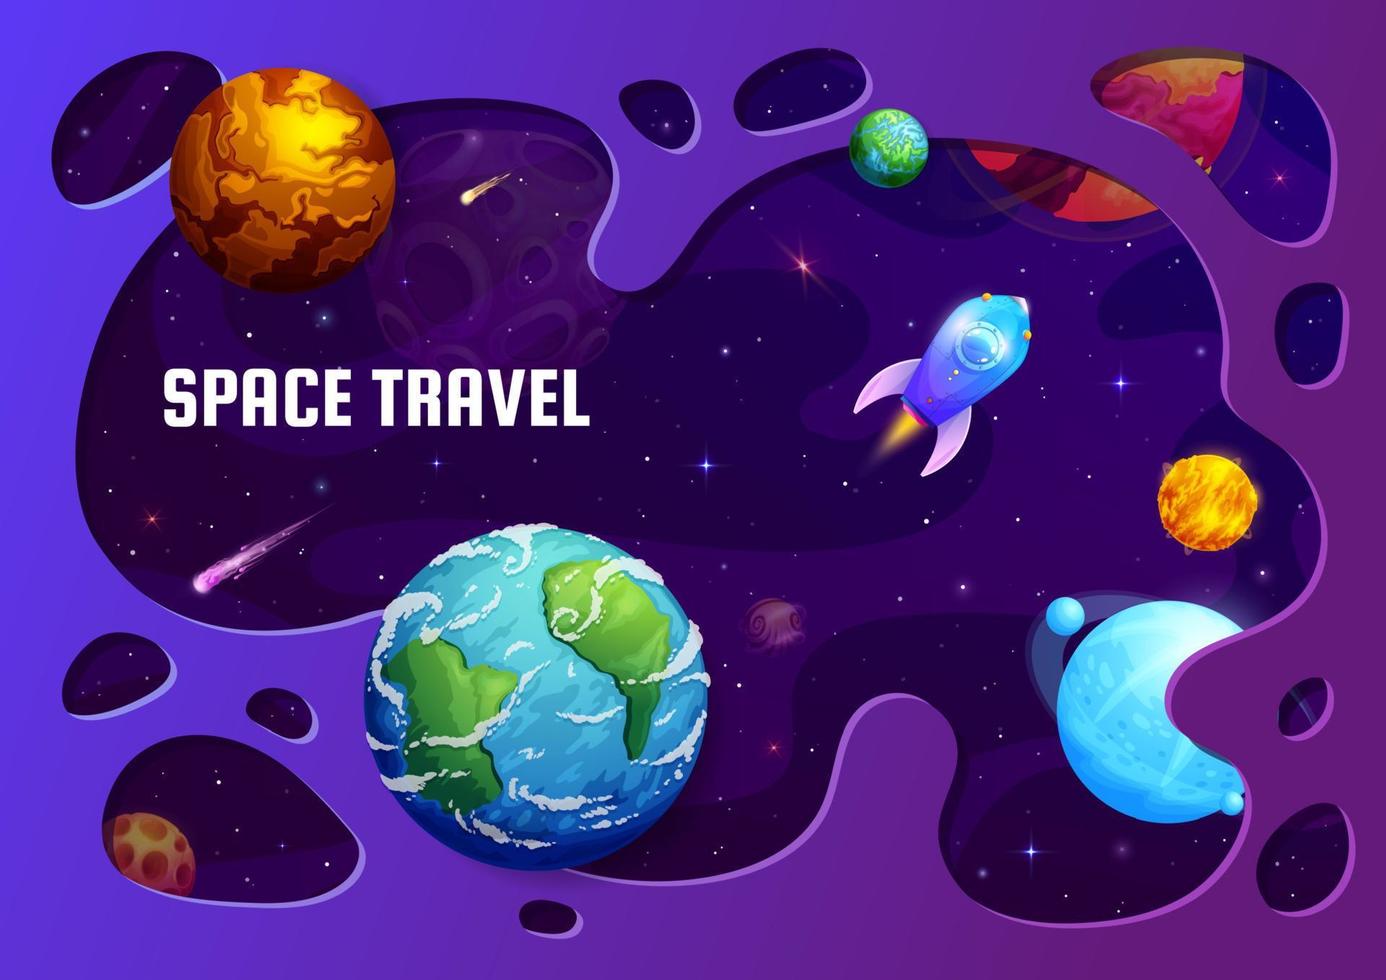 Paper cut space landscape with planets and rocket vector